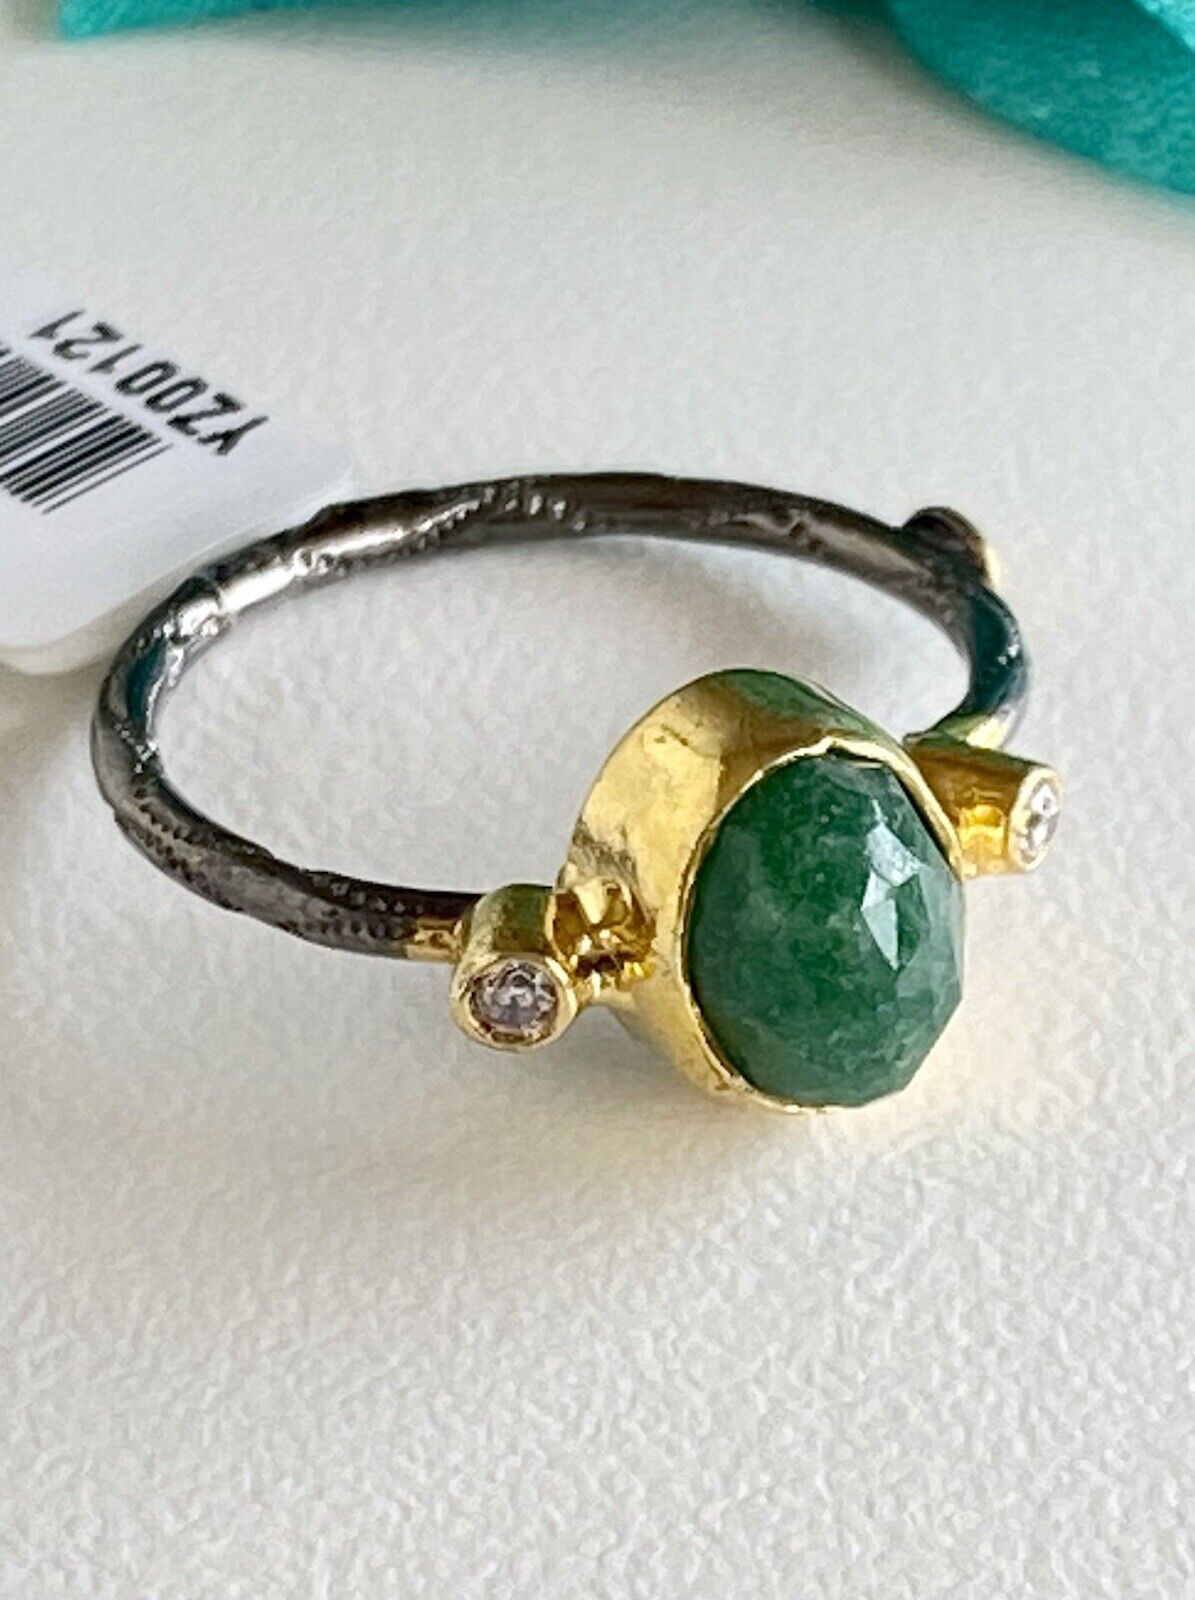 Antiqued Sterling Silver 22k Yellow Gold Green Quartz Ring Size 5/6.25